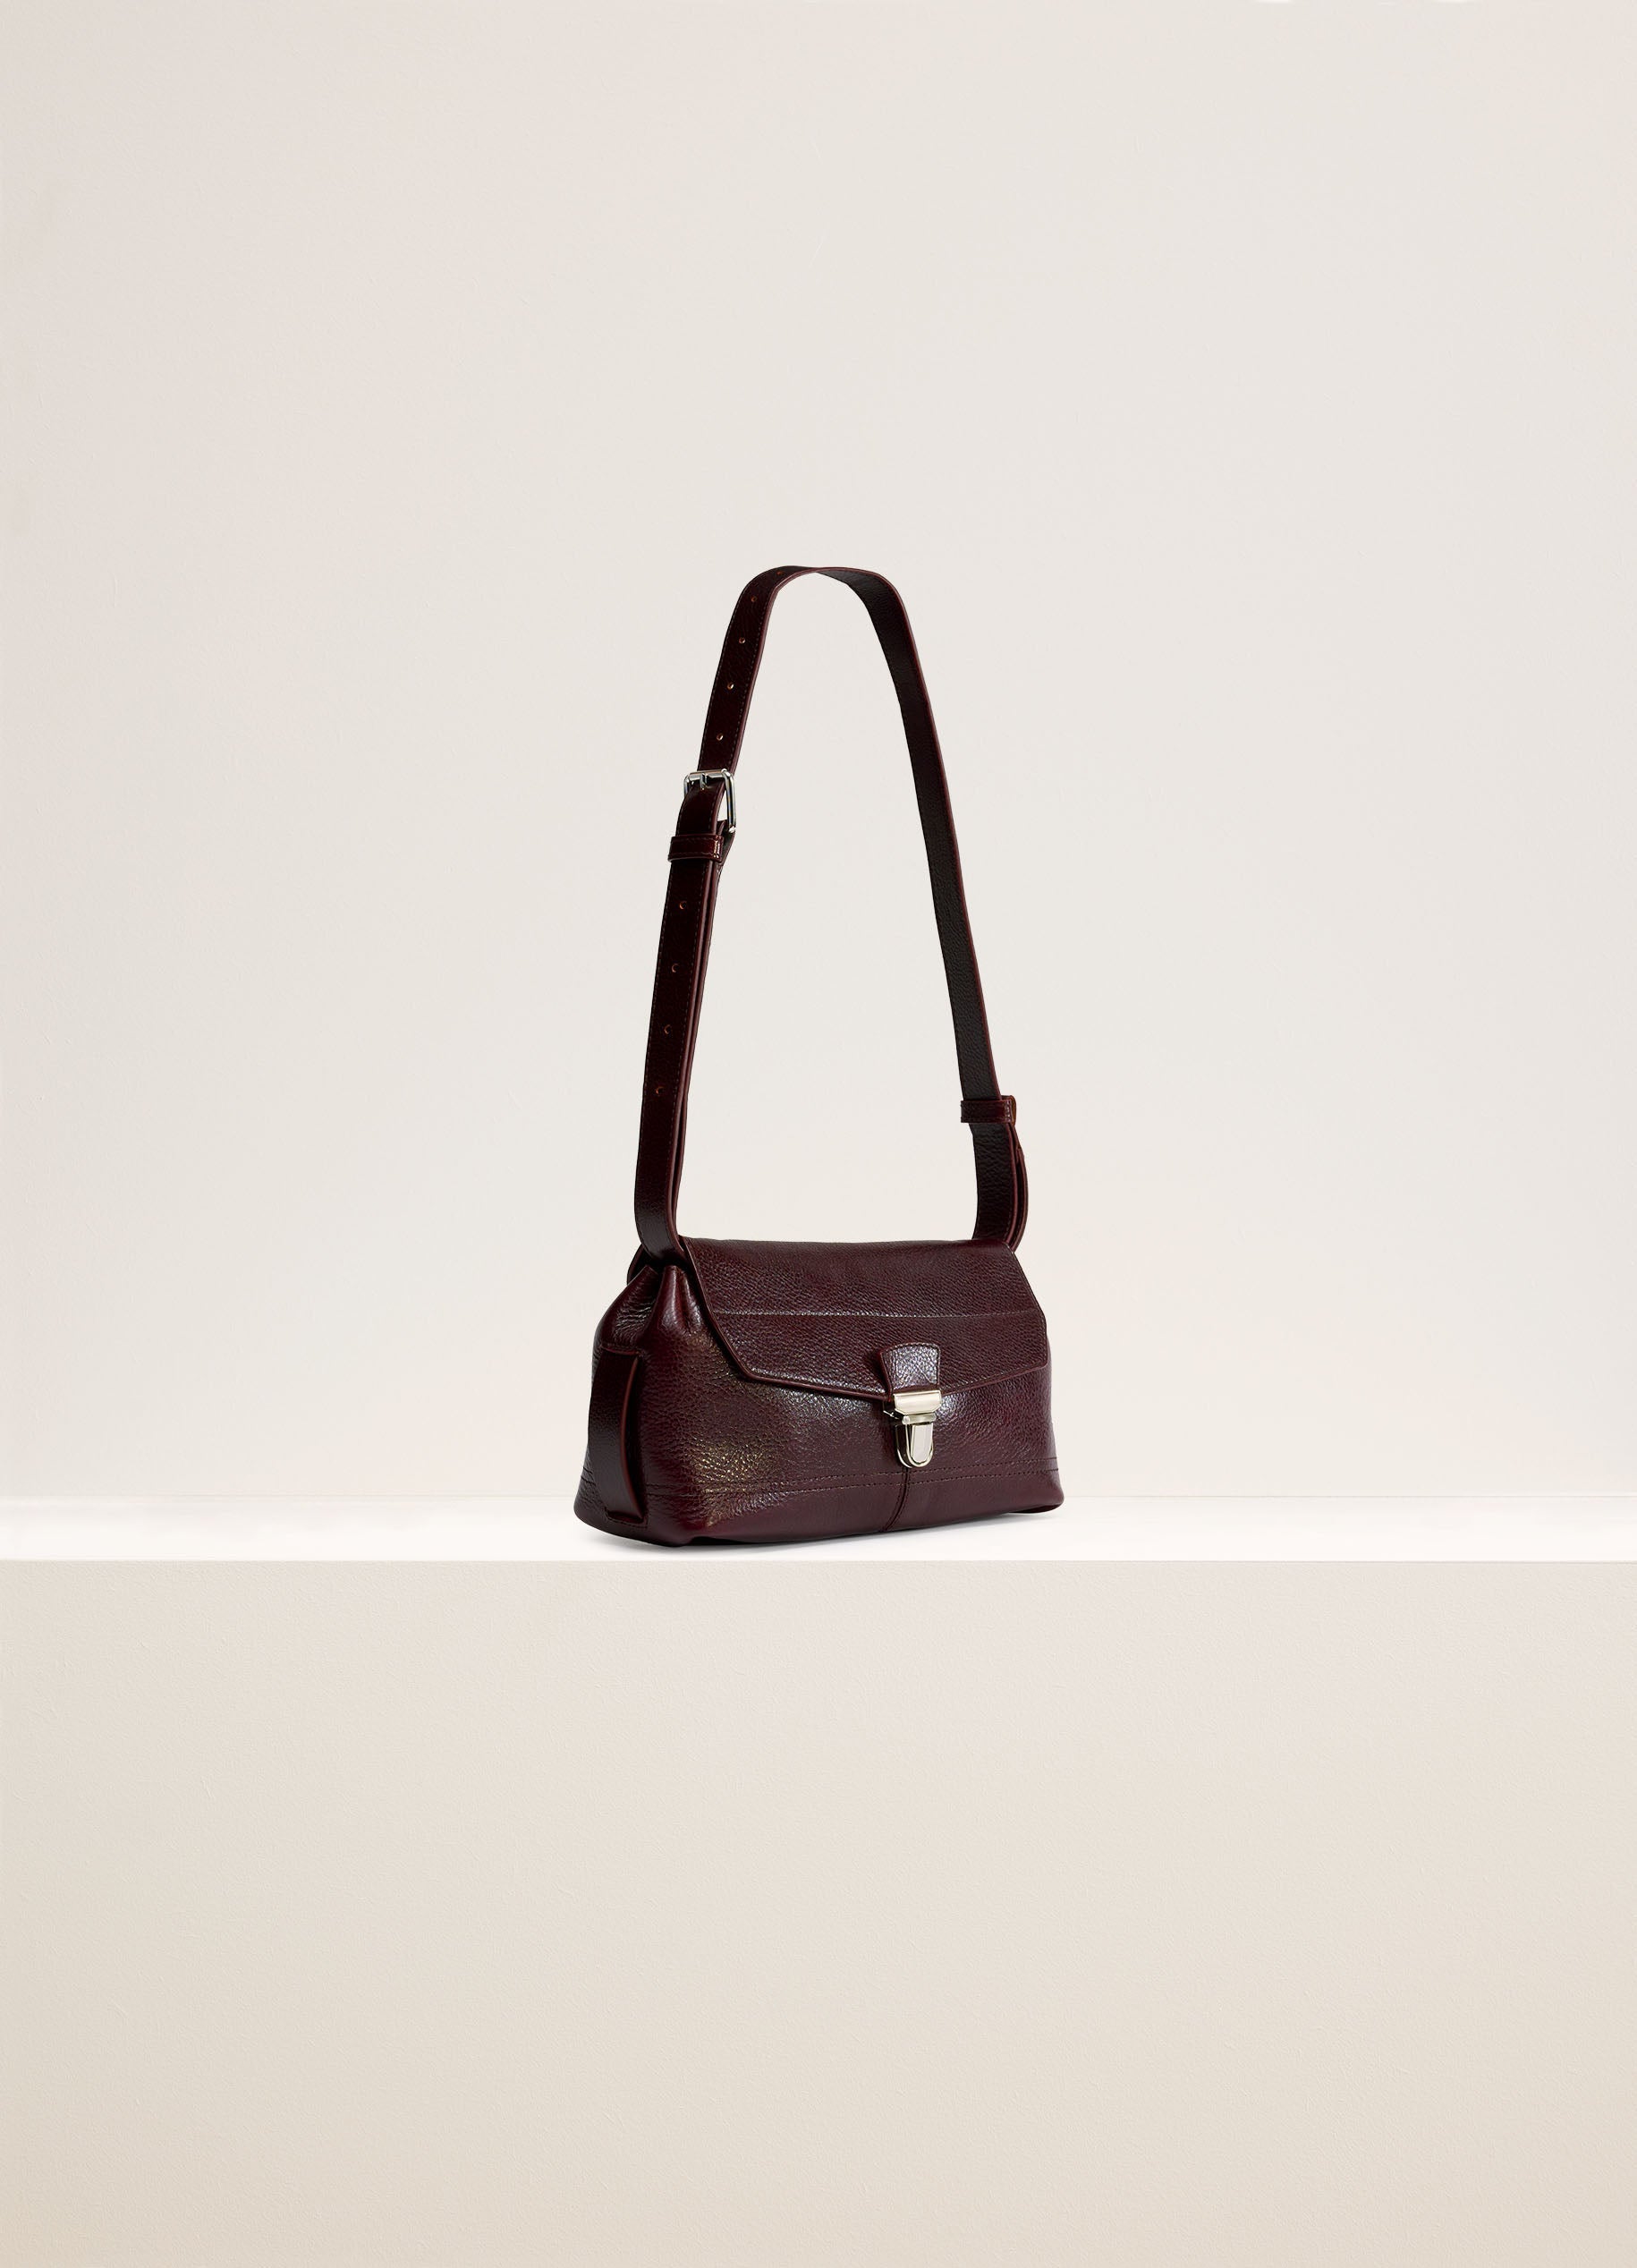 Gear Small Bag in Dark Eggplant | LEMAIRE